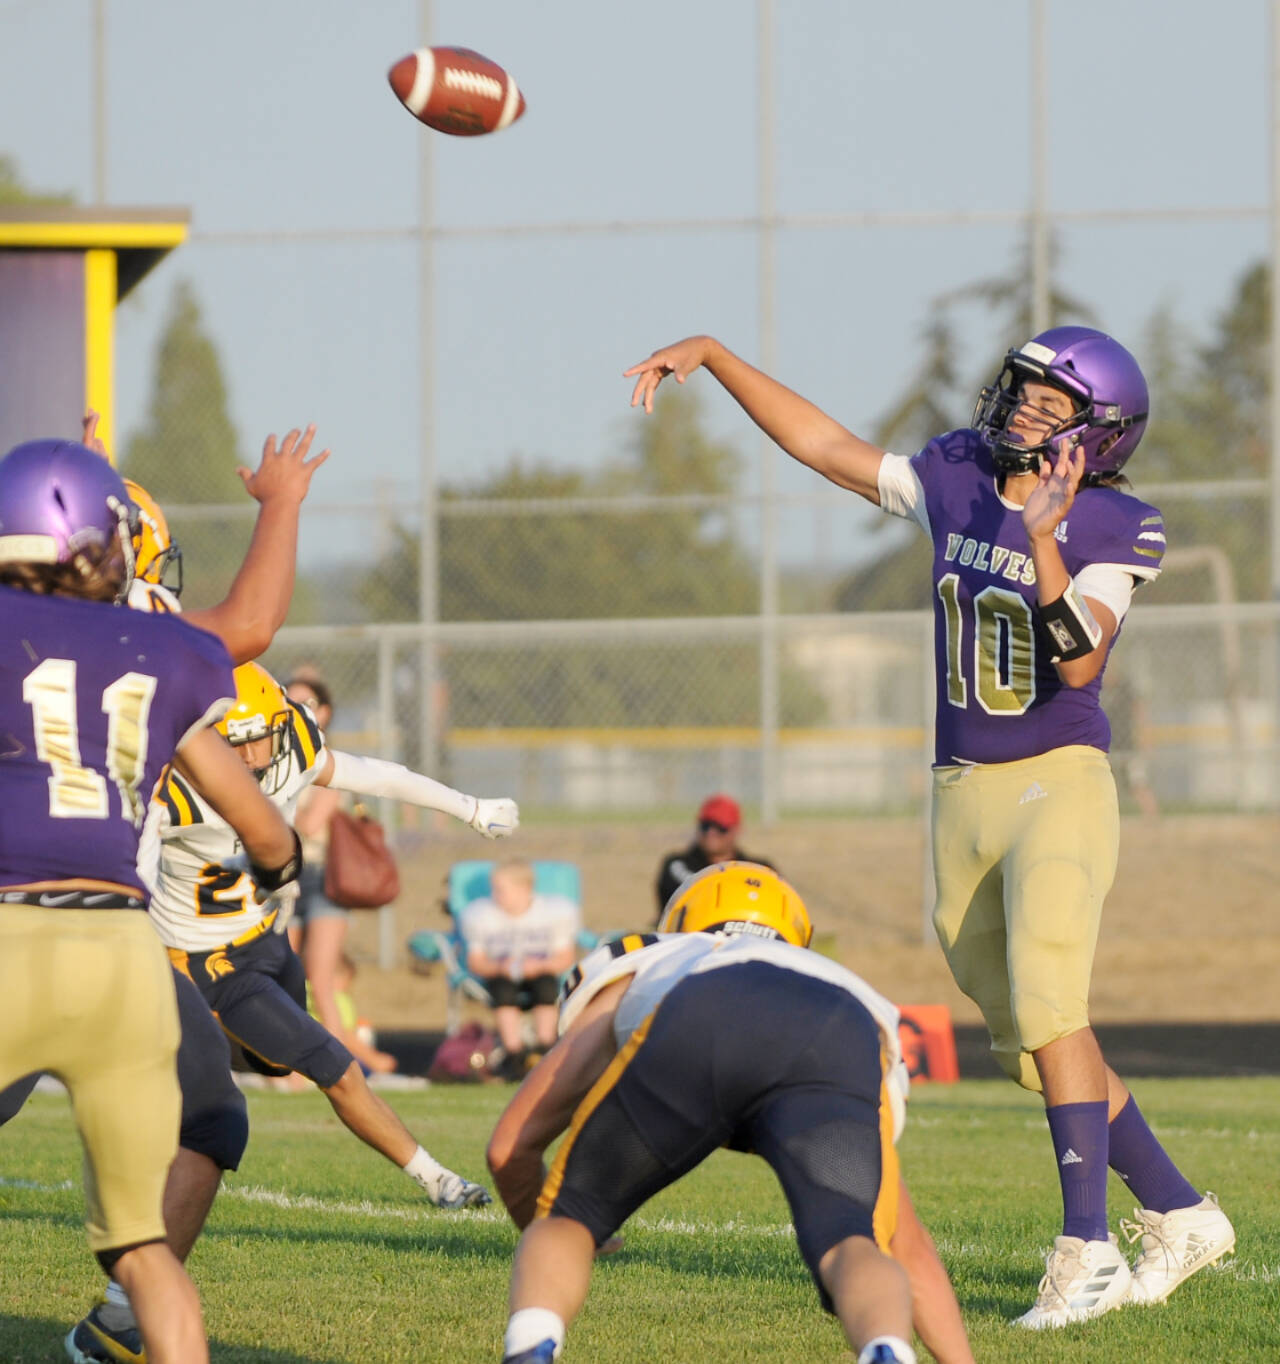 Quarterback Lars Wiker (10) is back this year for the Sequim Wolves, who will be looking to bounce back from a 2-7 season. (Michael Dashiell/Olympic Peninsula News Group)